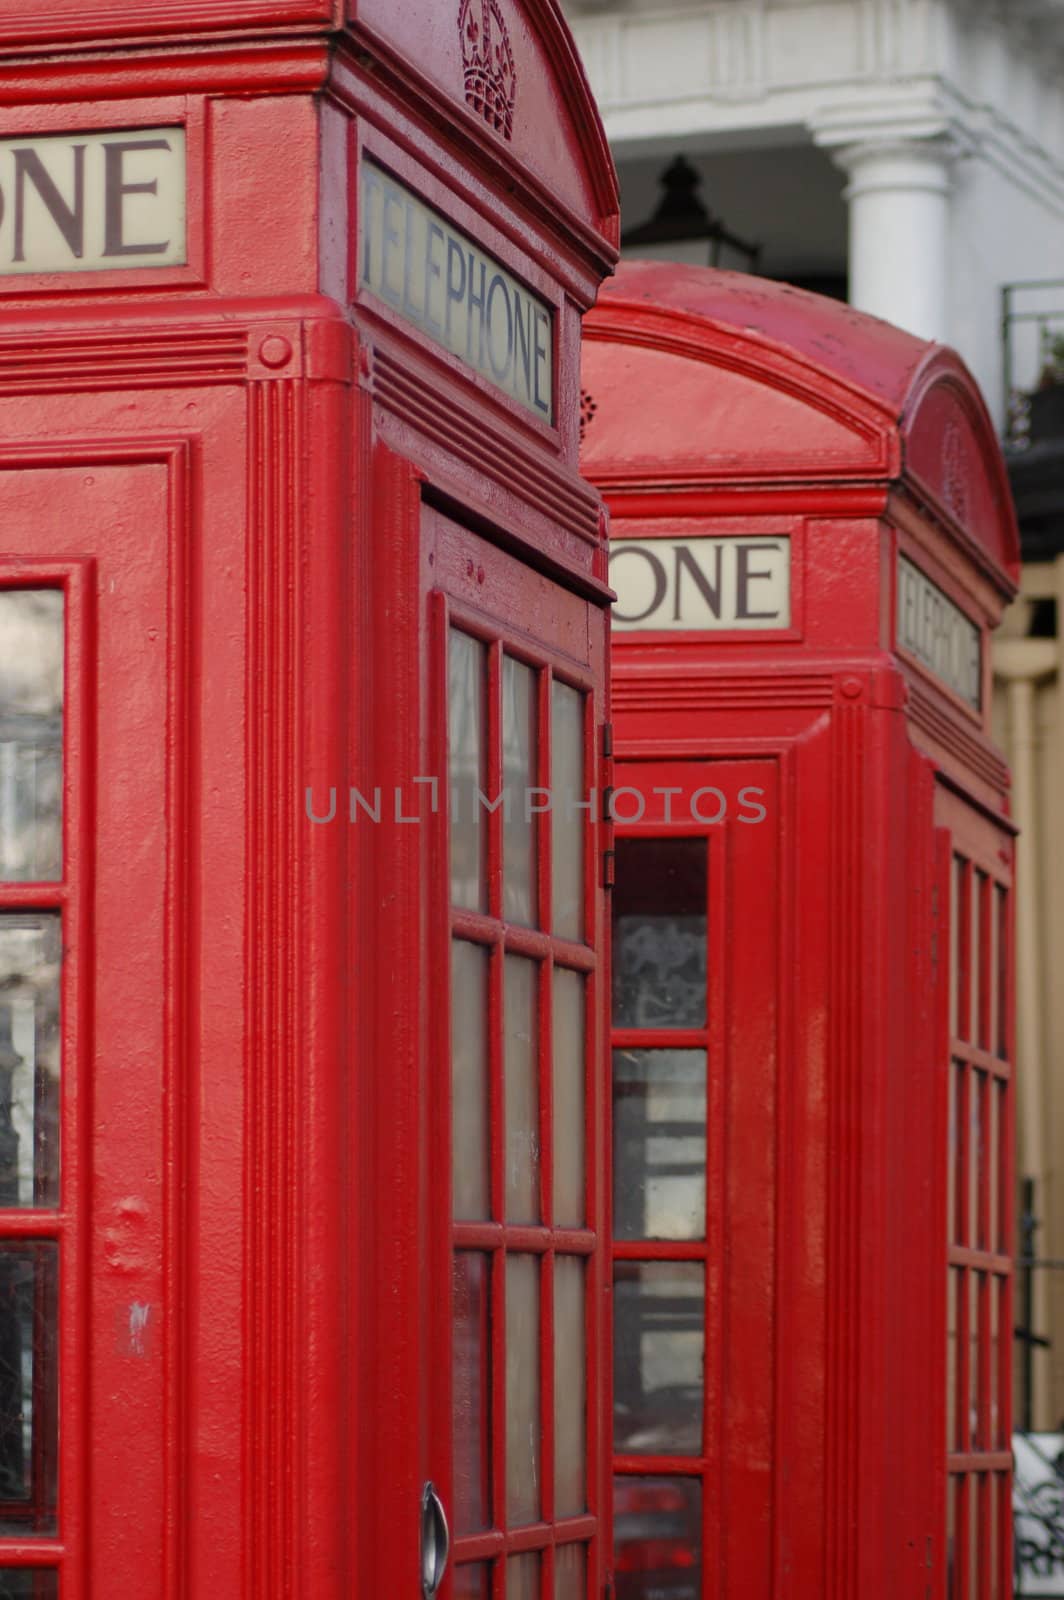 Two old style red UK telephone boxes